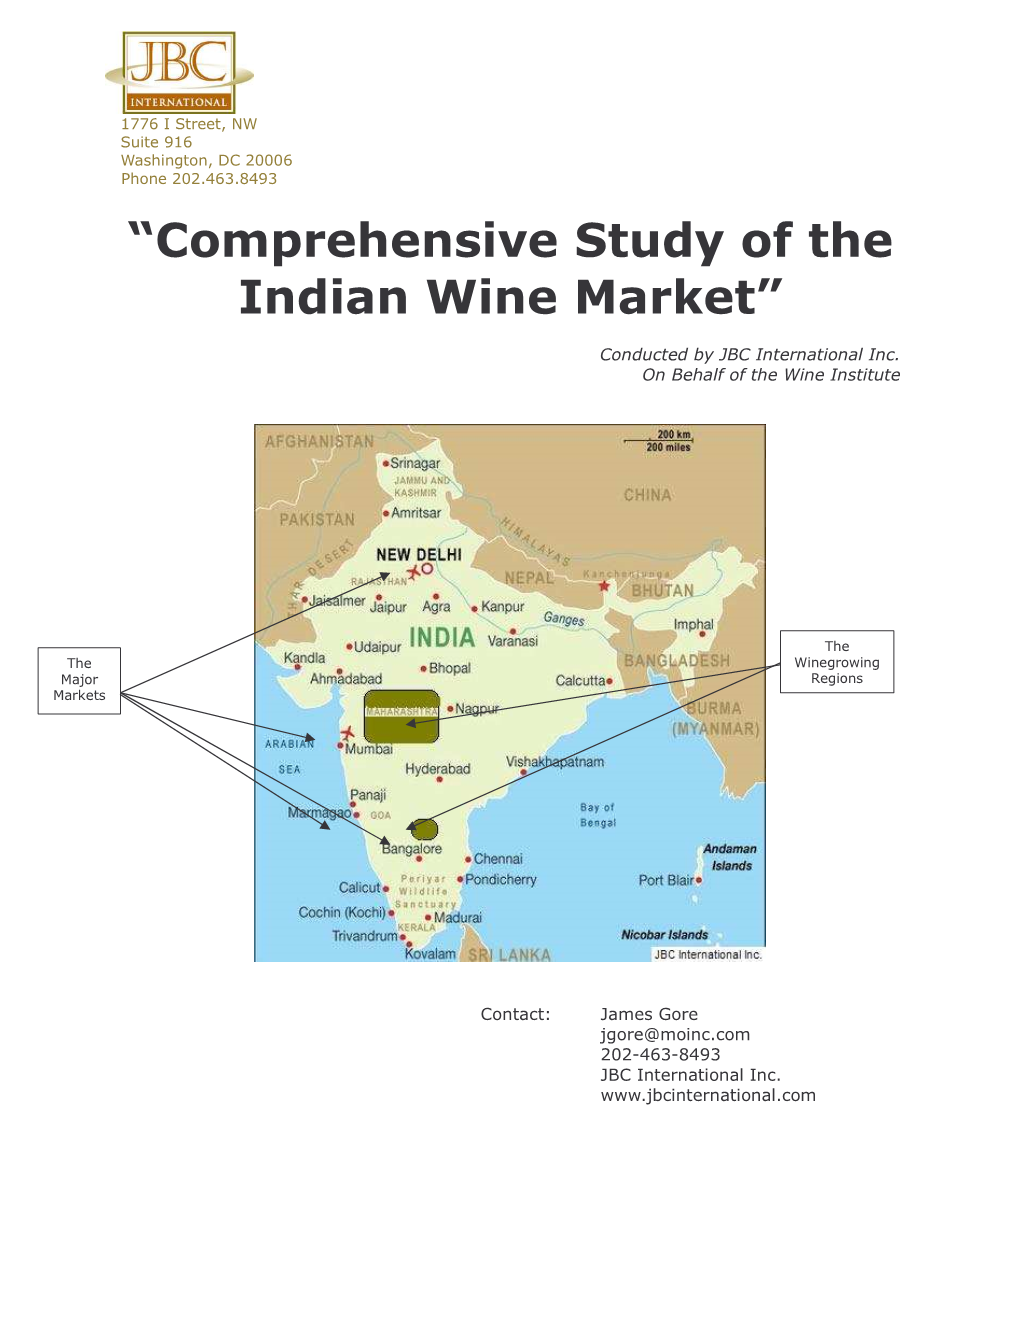 —Comprehensive Study of the Indian Wine Market“